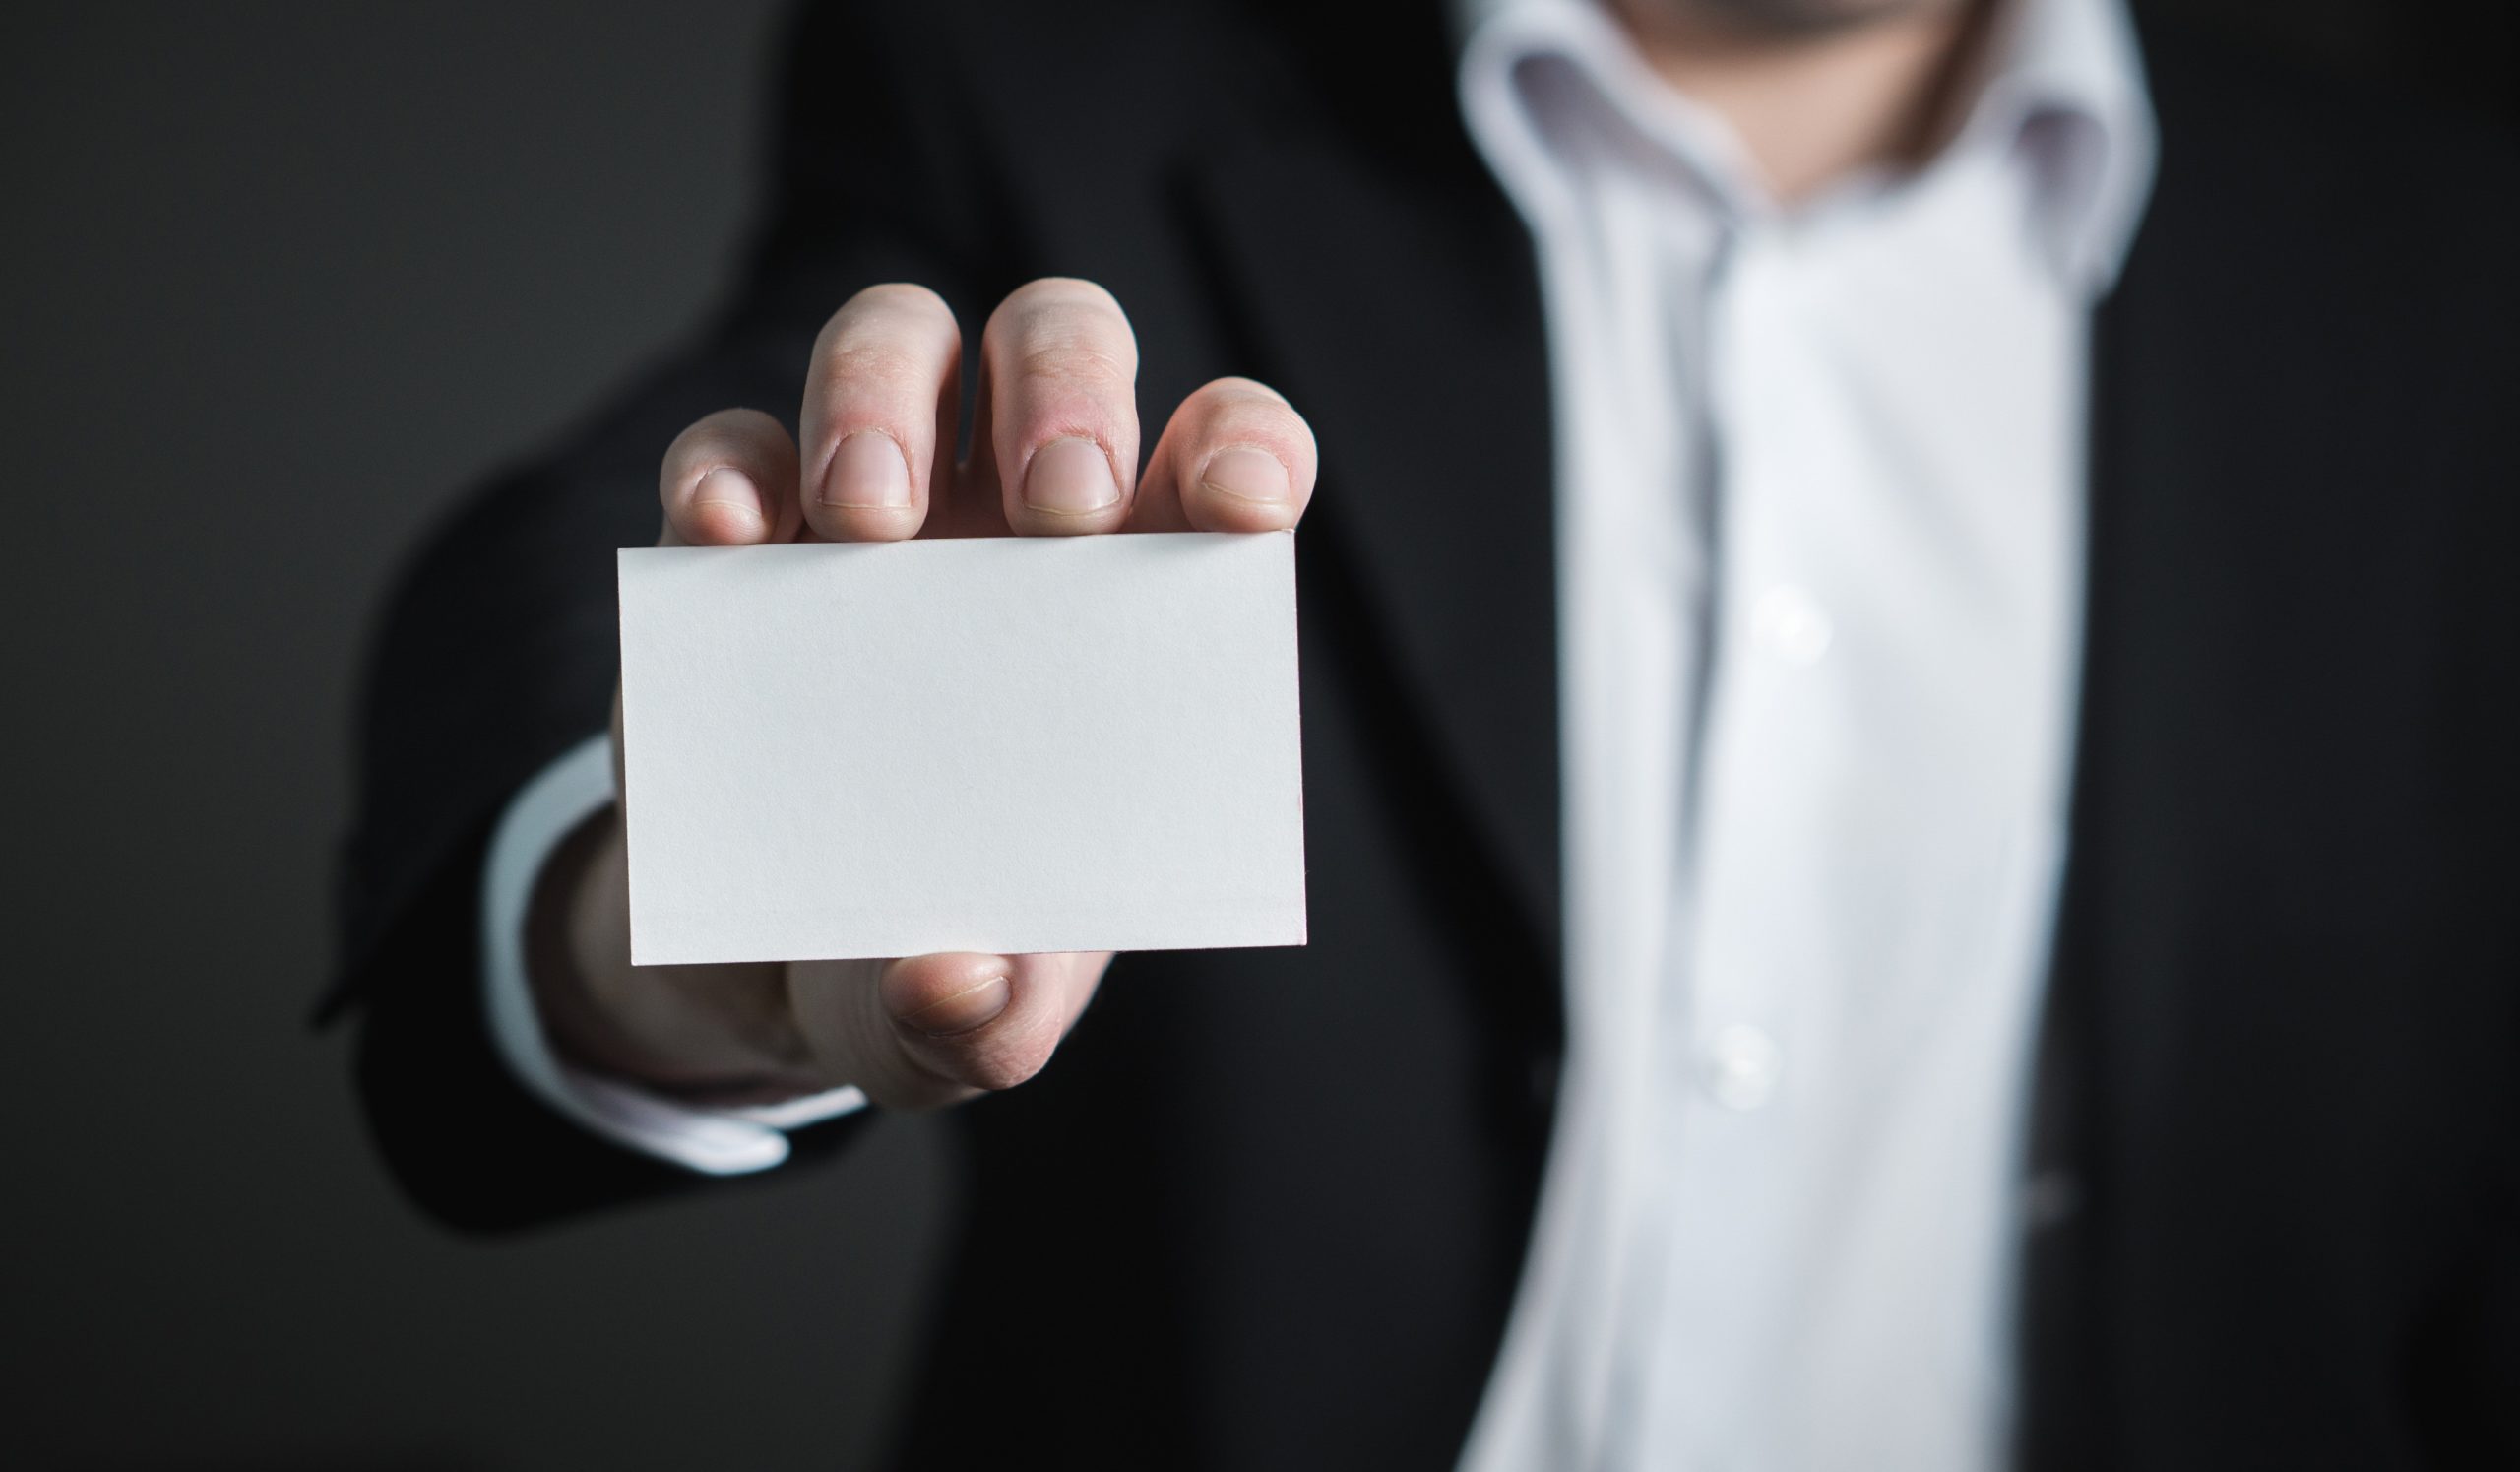 Blank Business Card Image